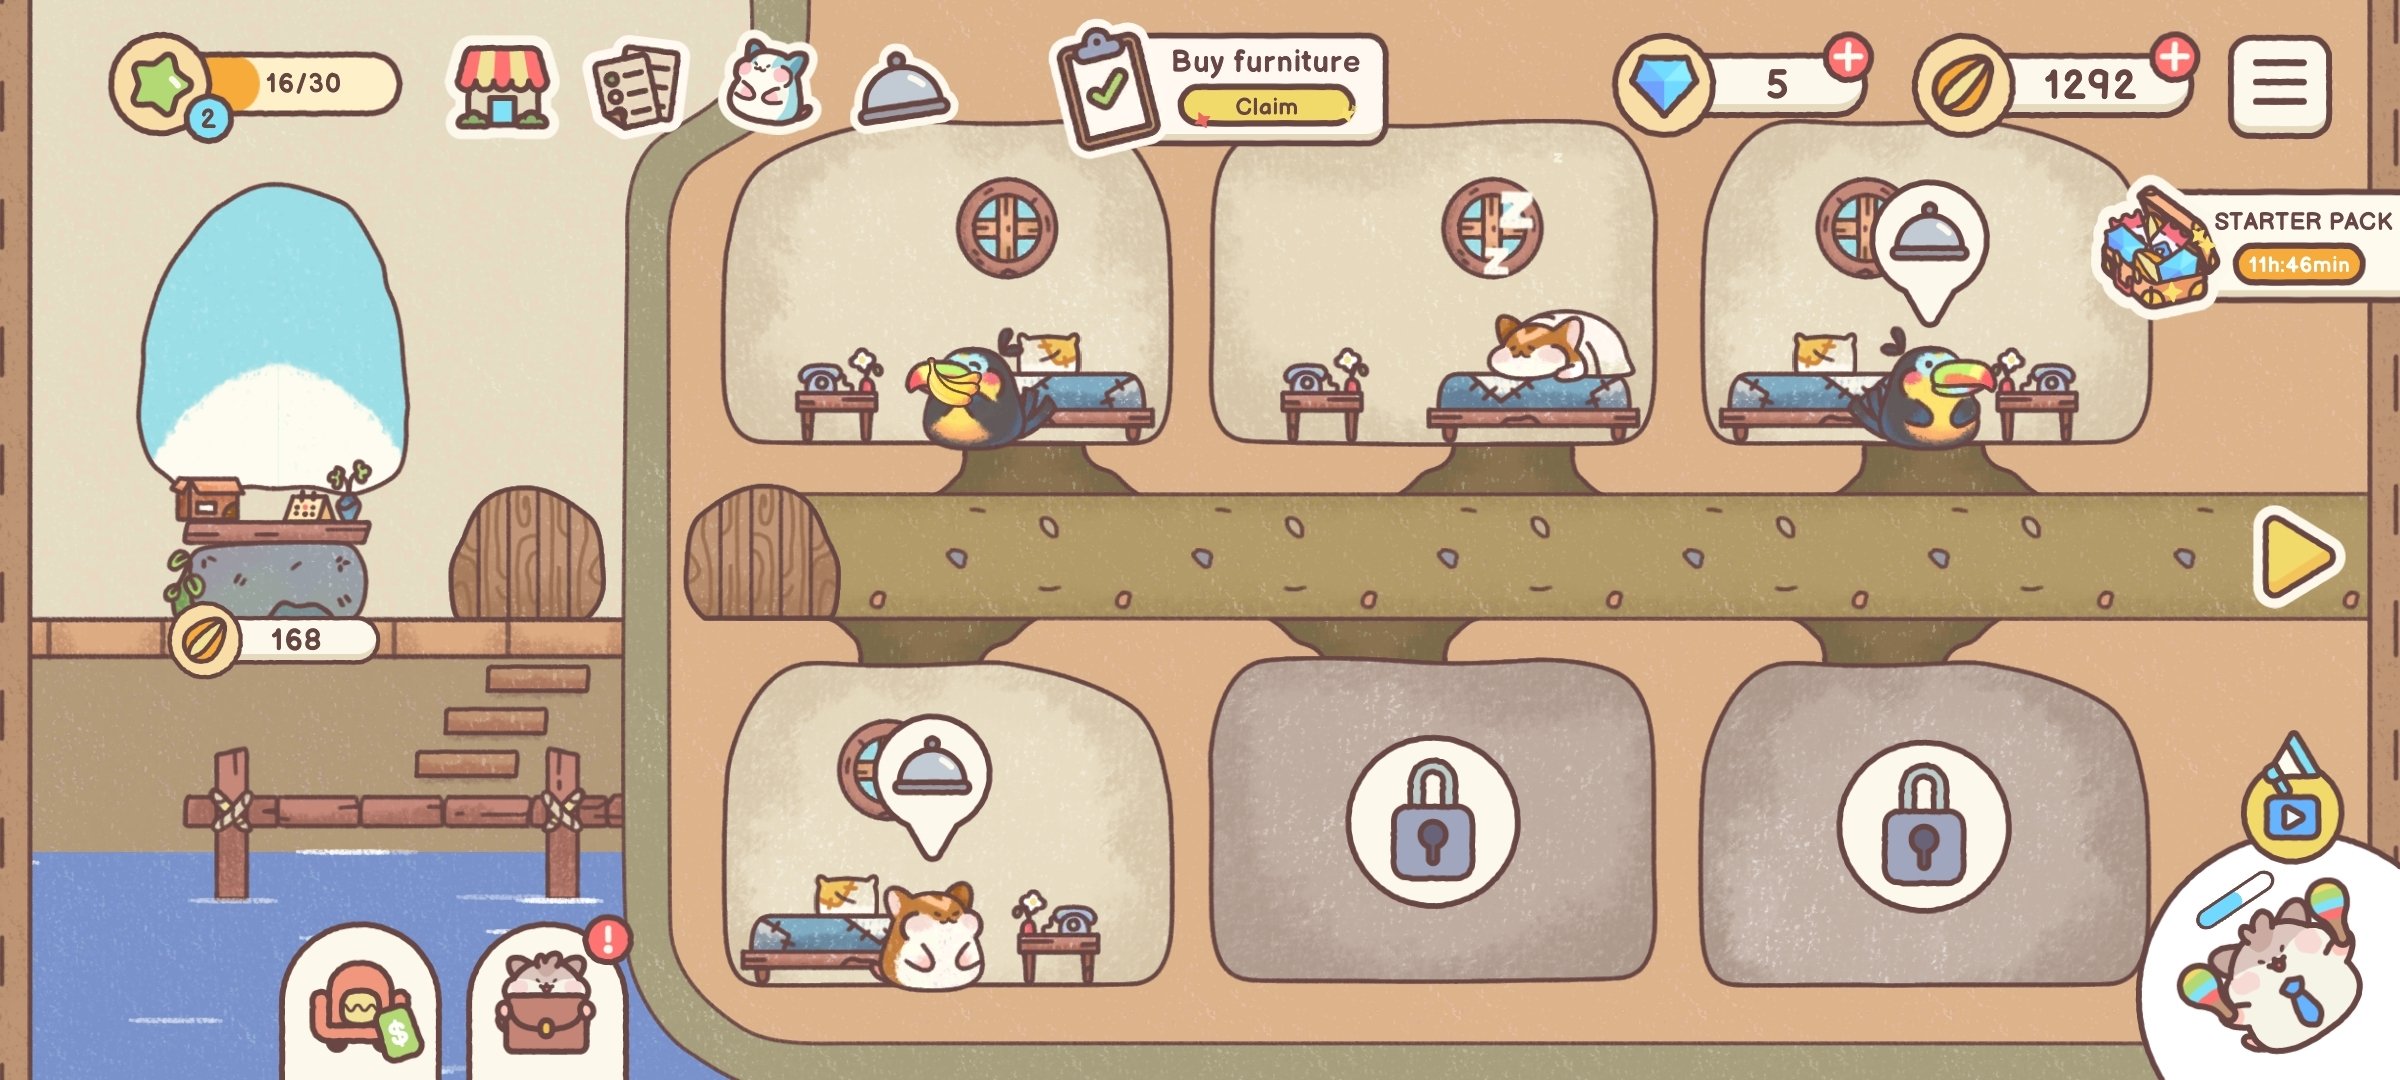 Download Hamster Inn 1.1 APK free for Android